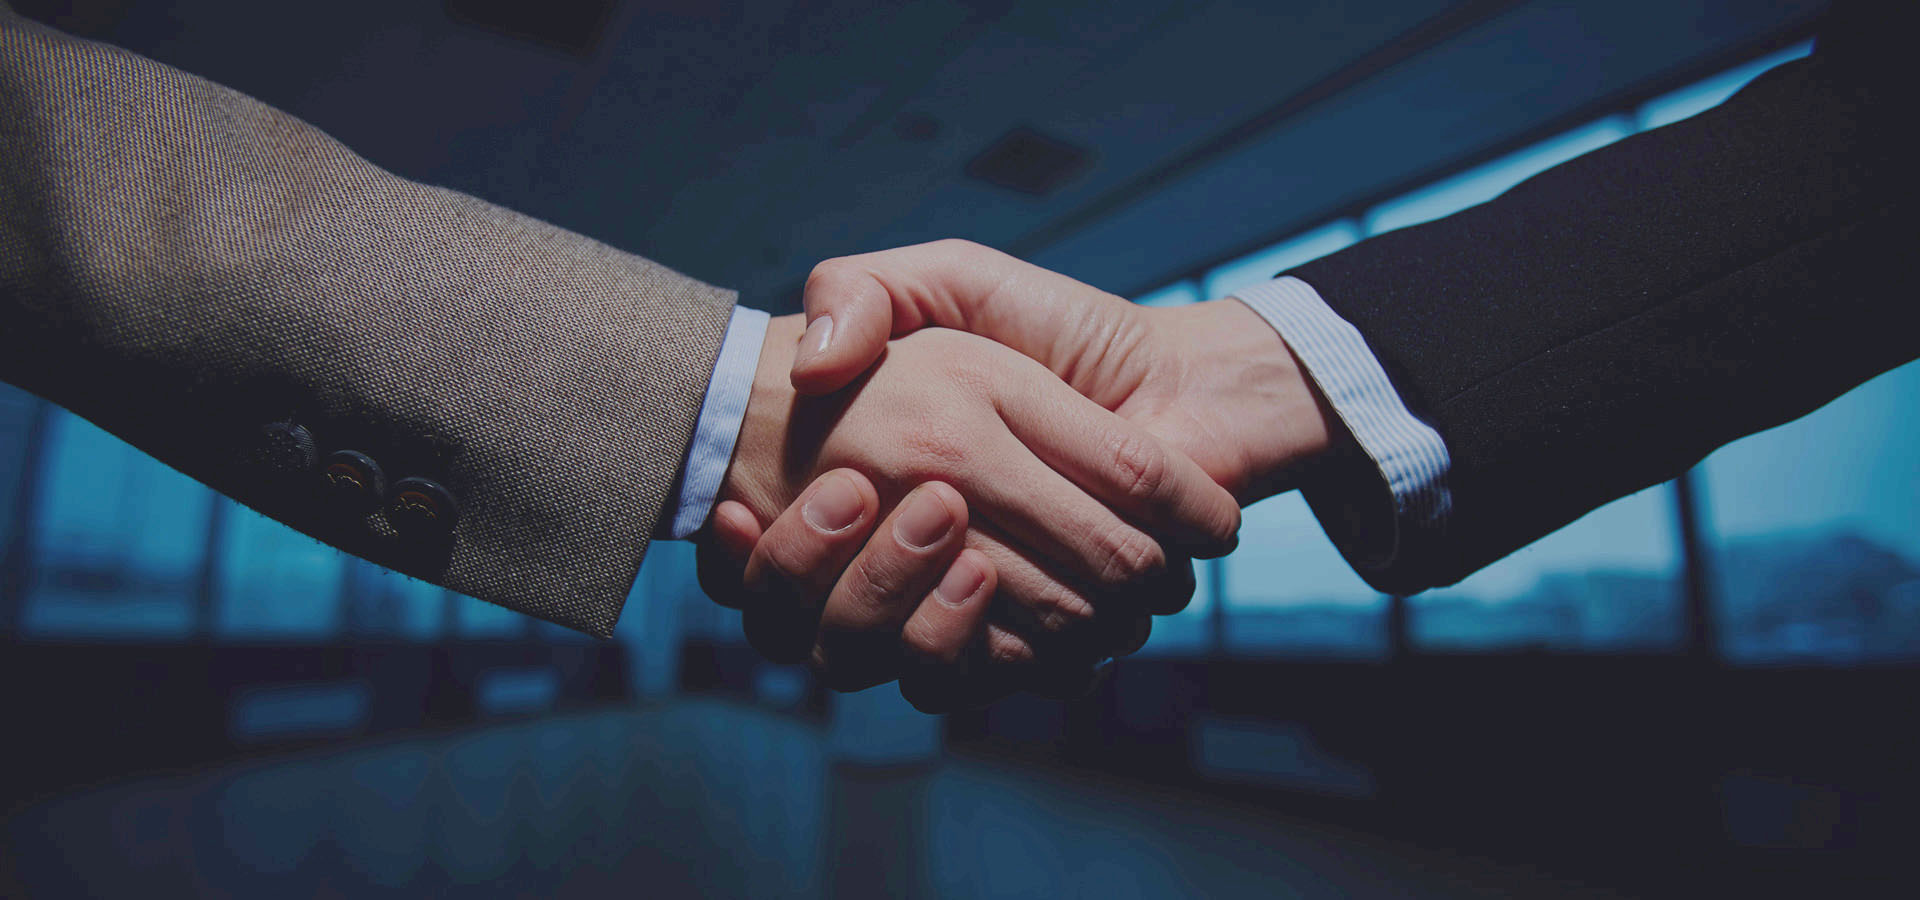 Two men shaking hands after a deal is made.